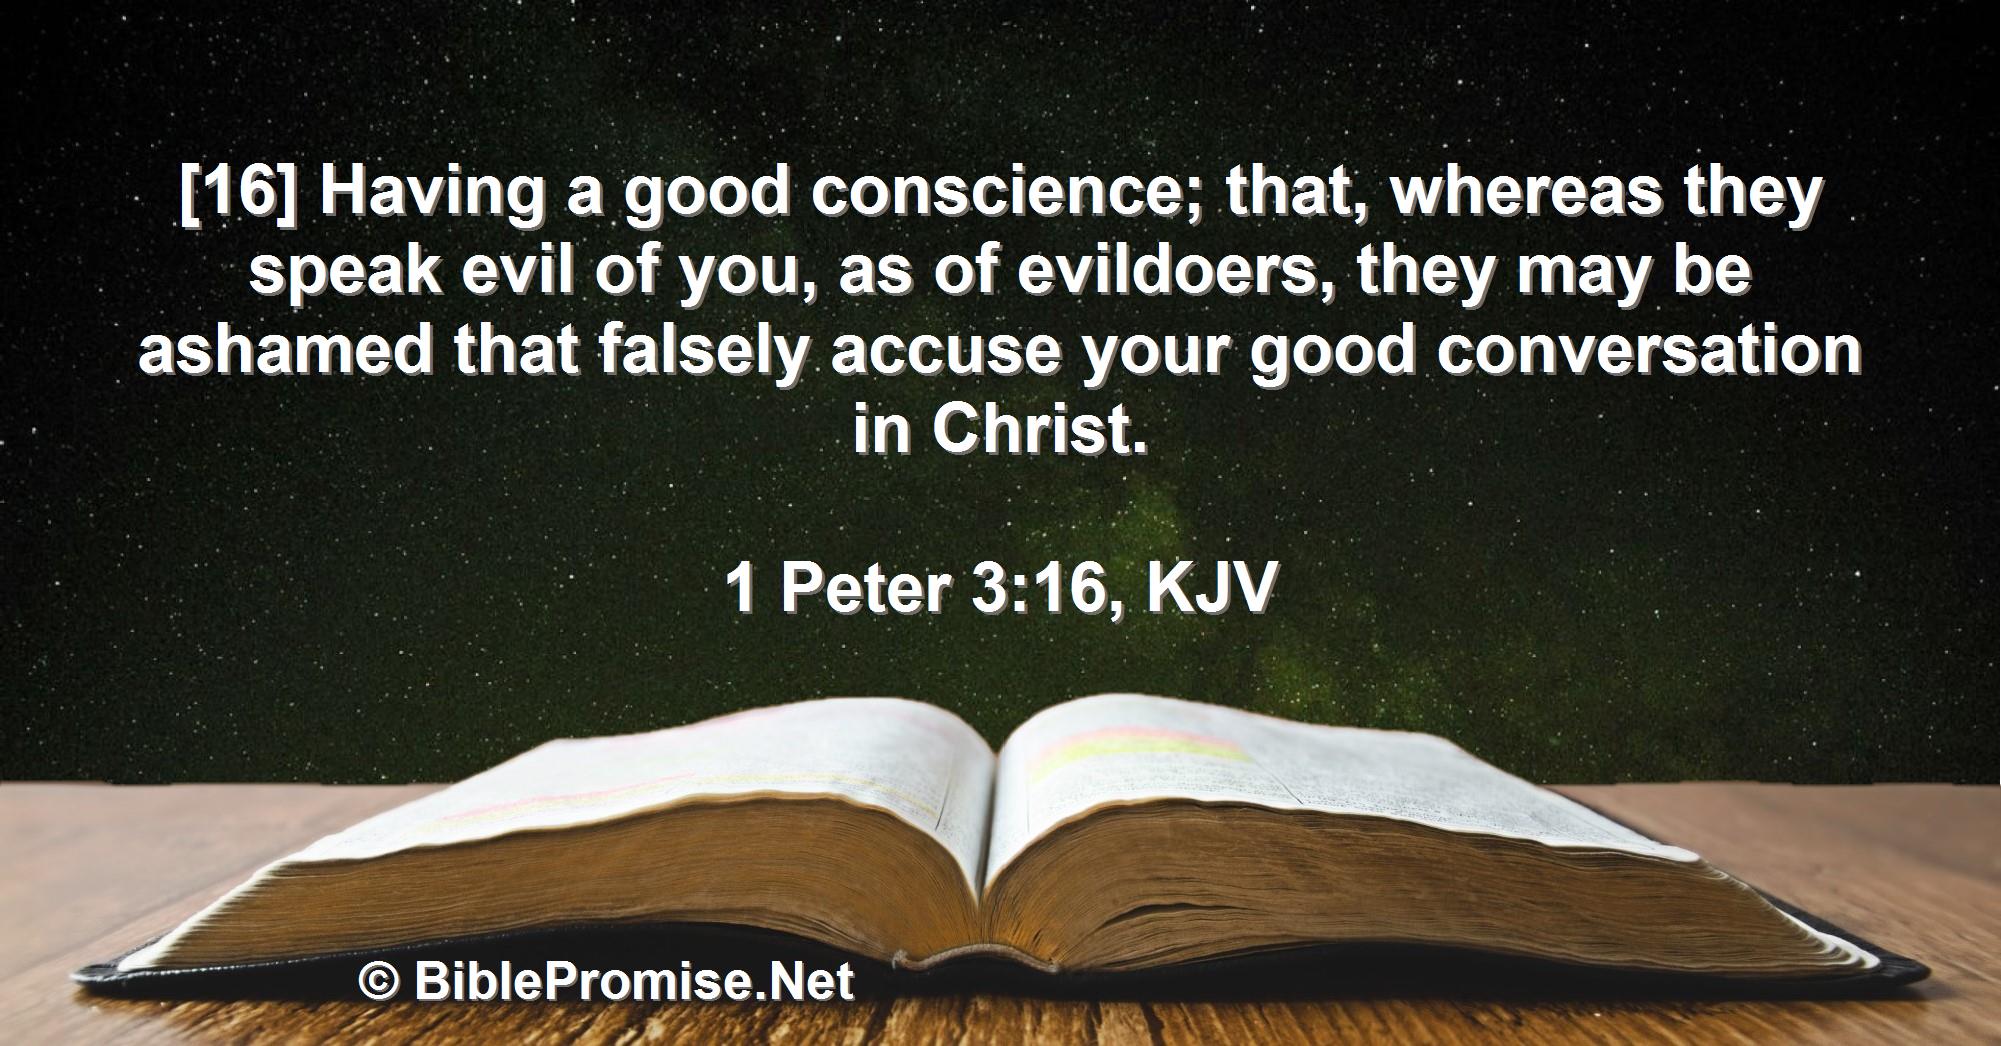 Wednesday, May 31, 2023 - 1 Peter 3:16 (KJV) - Bible promise that false accusers will be ashamed.